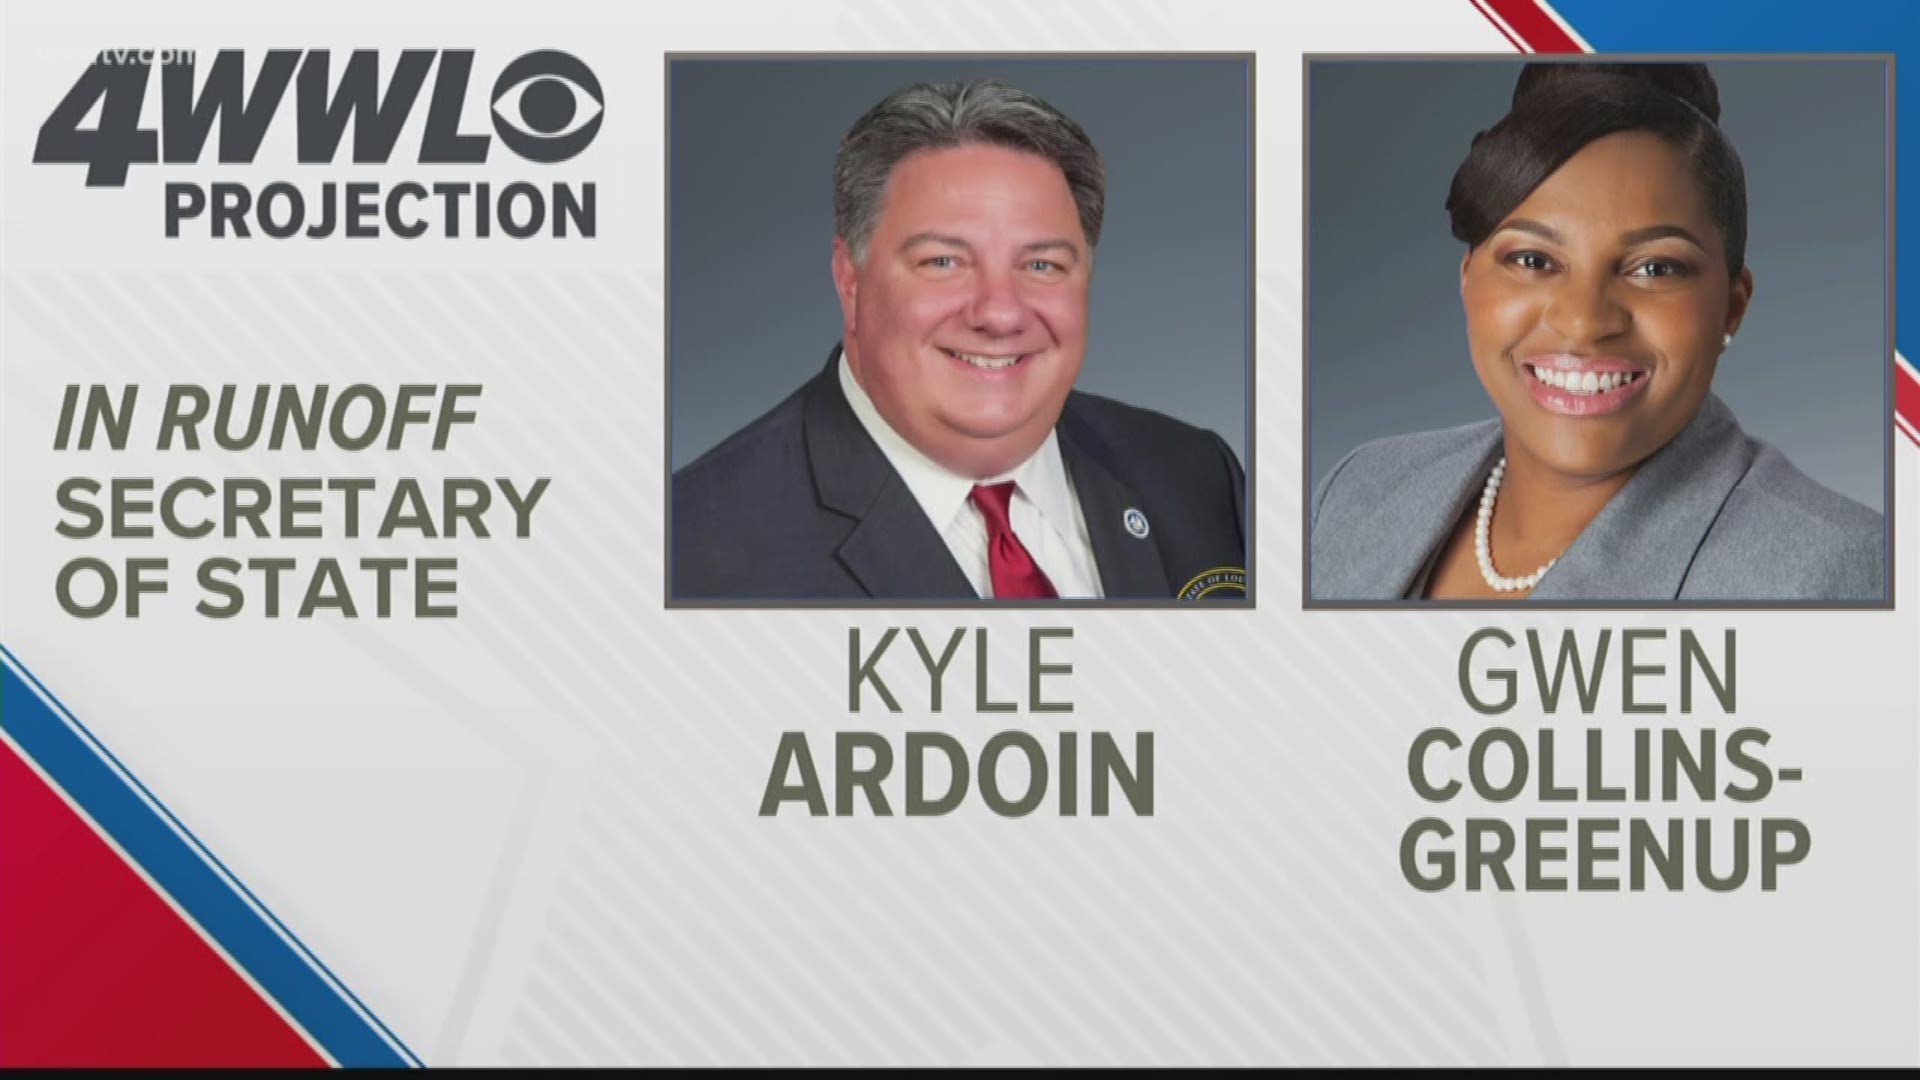 Secretary of State Kyle Ardoin is officially in a runoff with Gwen Collins-Greenup, the same democrat he defeated in 2018